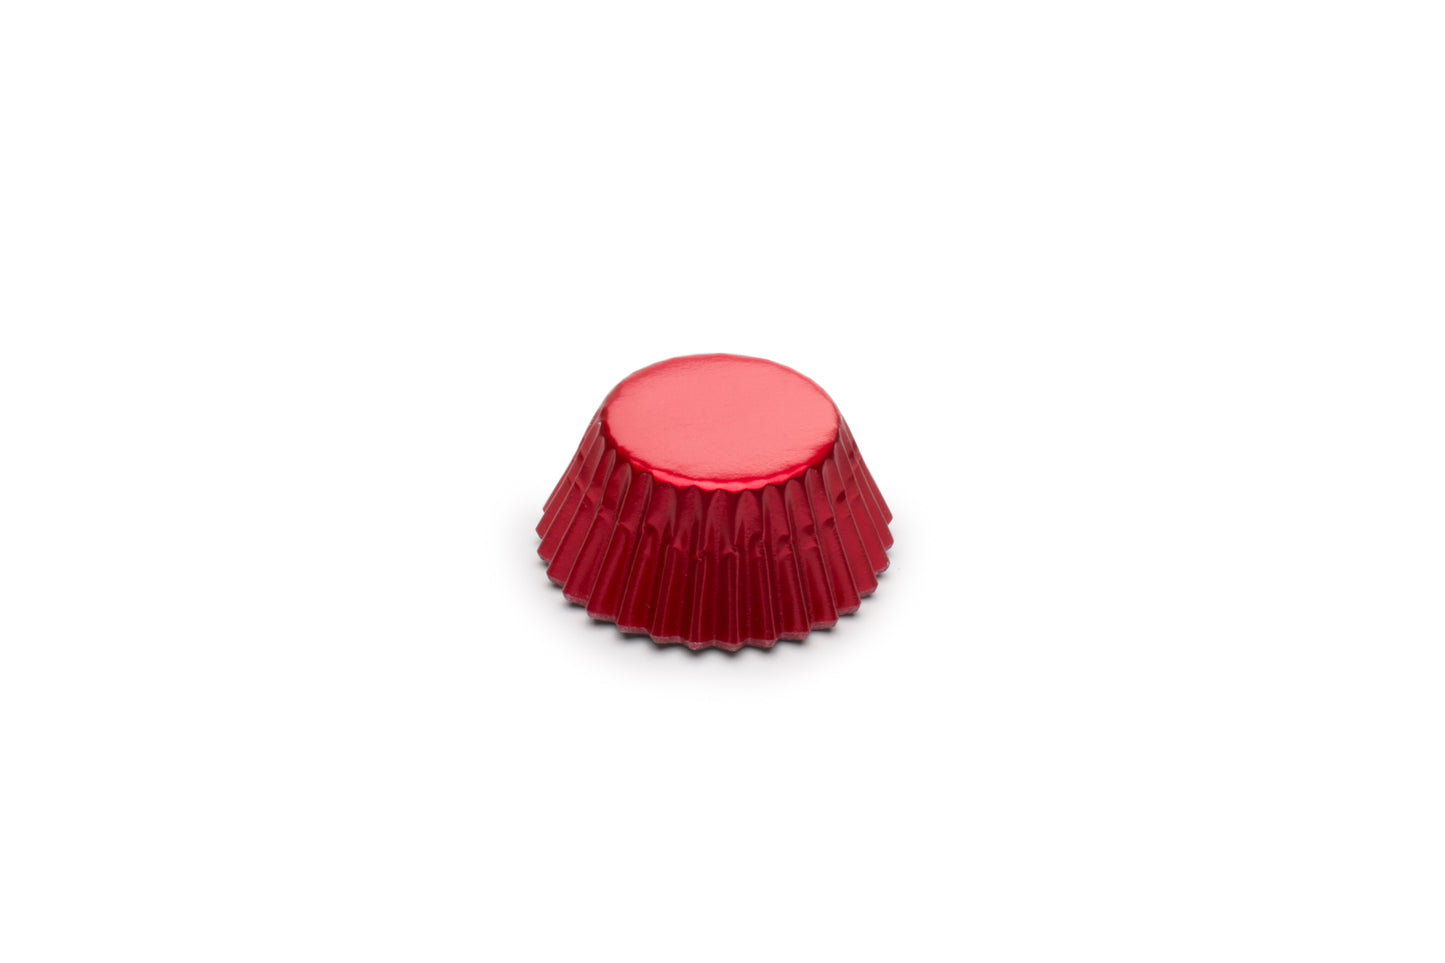 Mini Red Foil Bake Cups, 48 Count